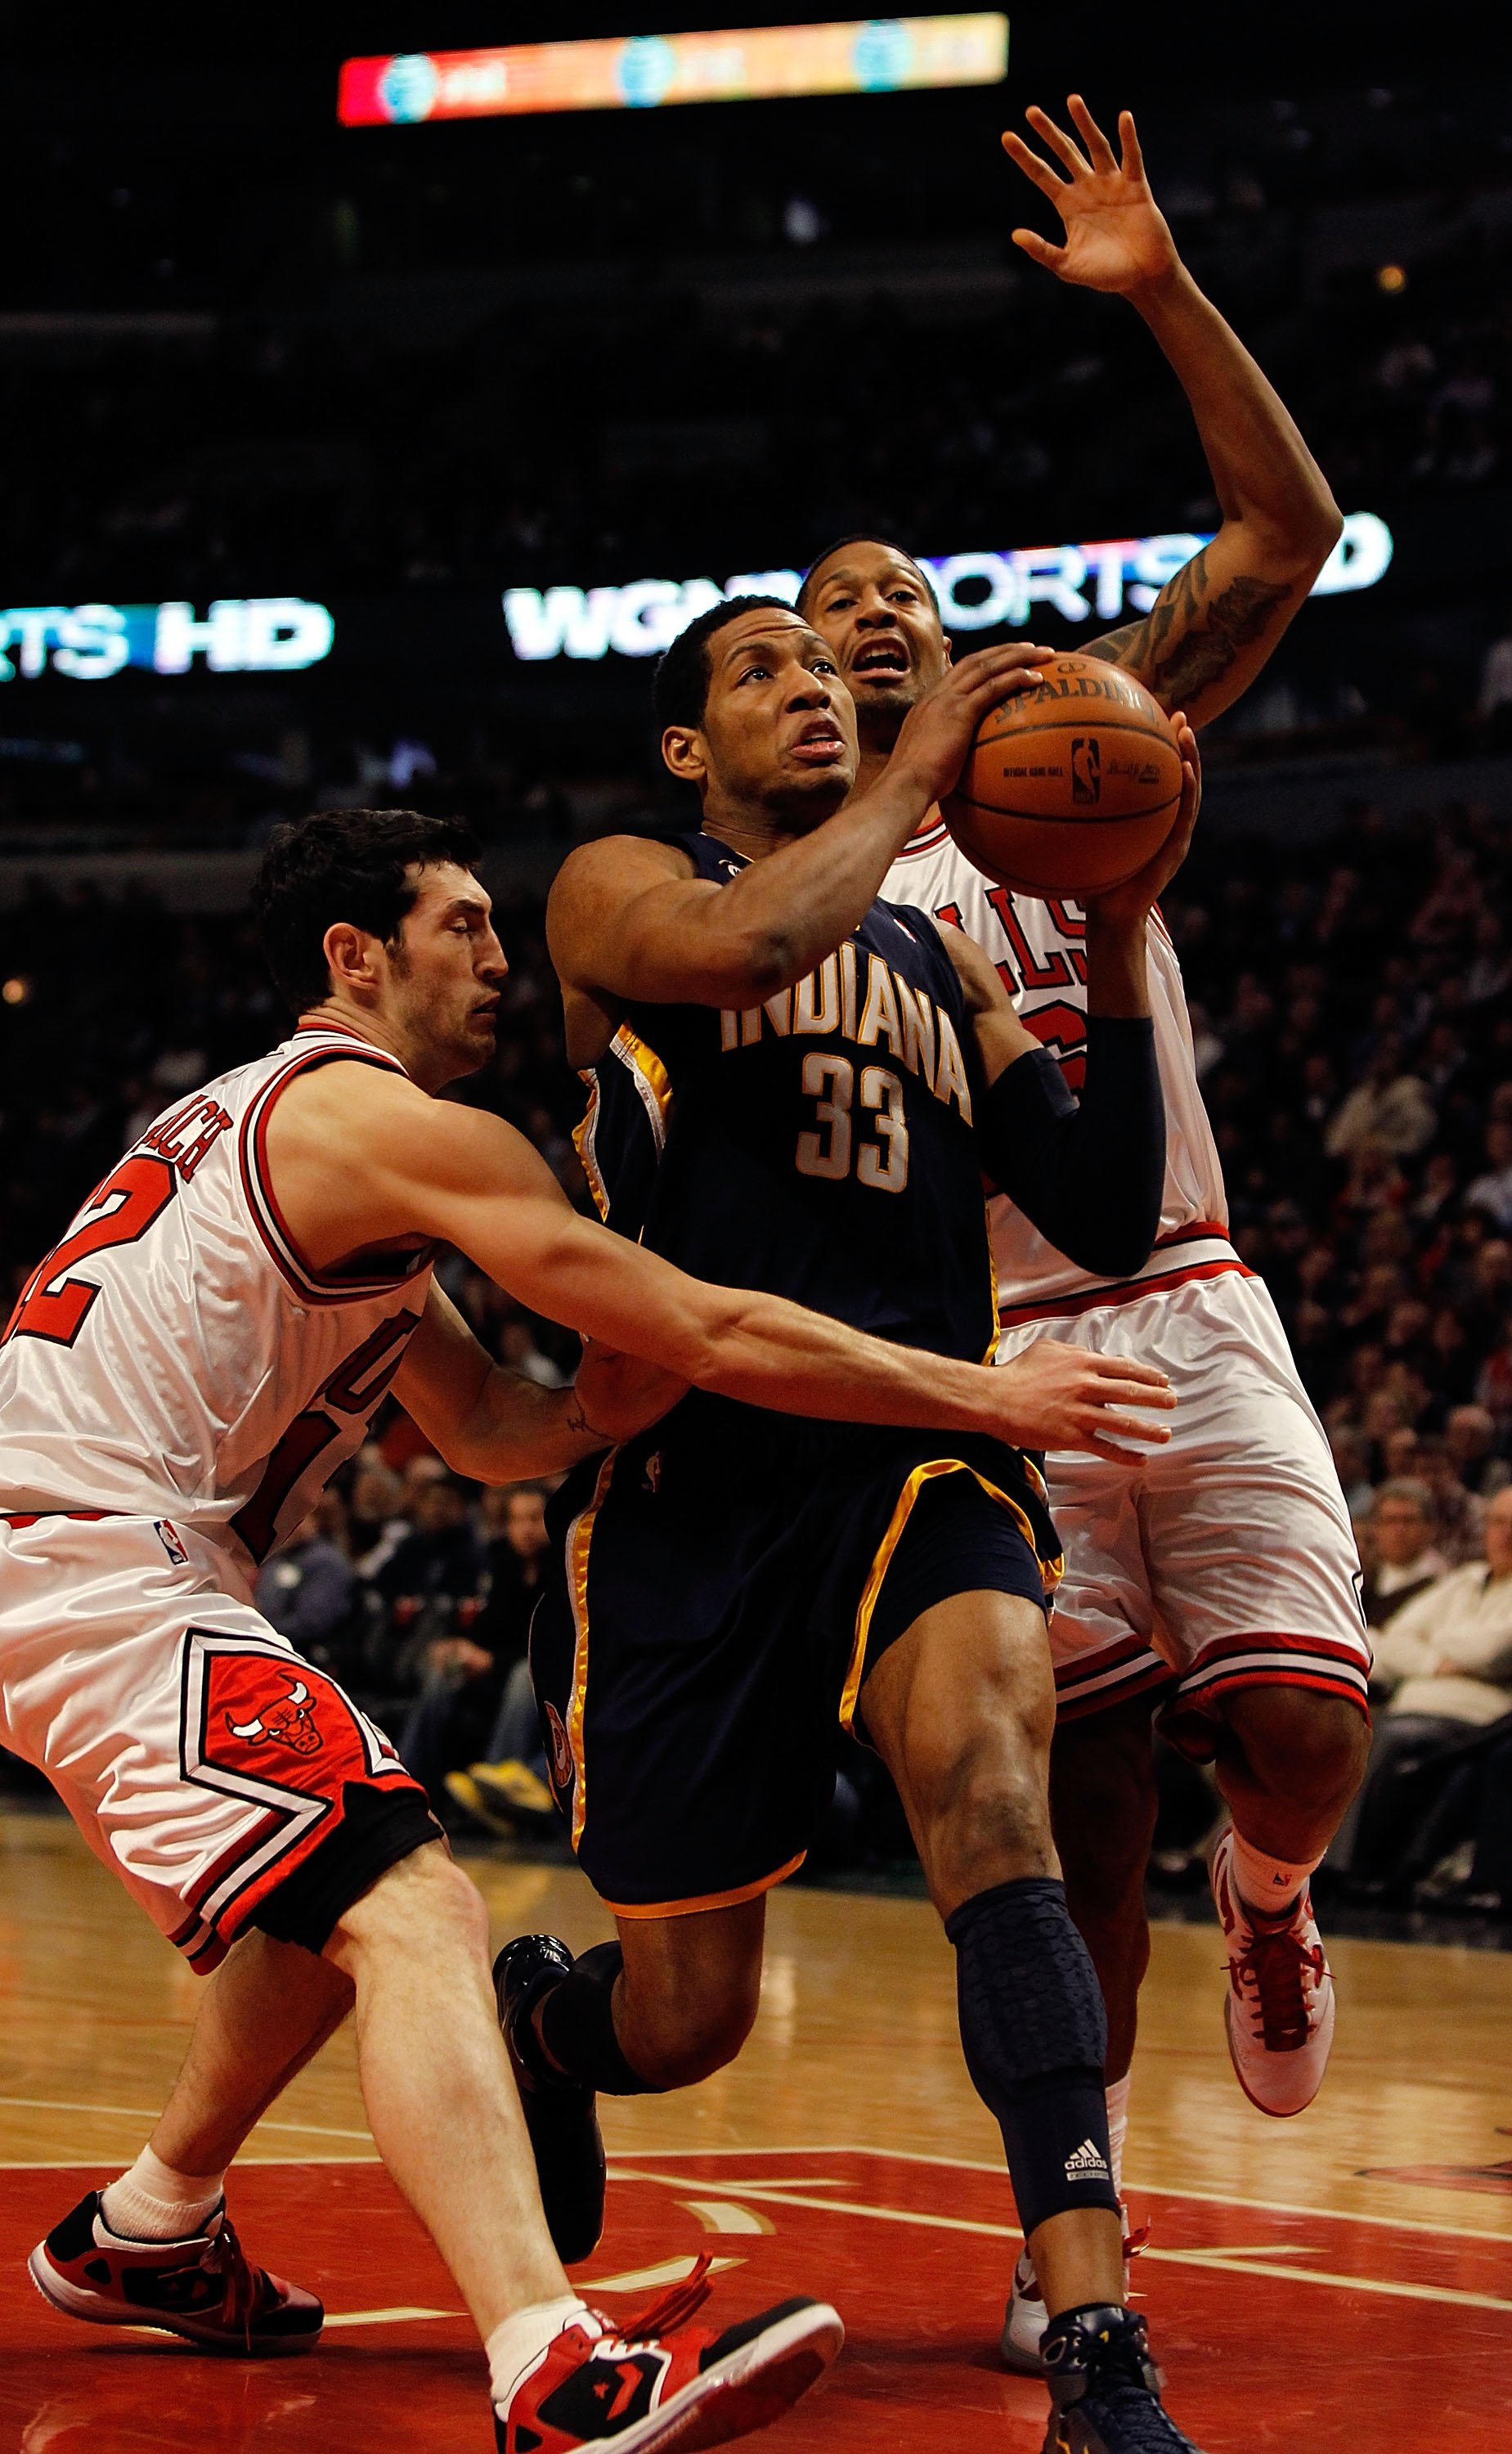 CHICAGO - FEBRUARY 24: Danny Granger #33 of the Indiana Pacers drives to the basket between Kirk Hinrich #12 and James Johnson #16 of the Chicago Bulls at the United Center on February 24, 2010 in Chicago, Illinois. The Bulls defeated the Pacers 120-110.